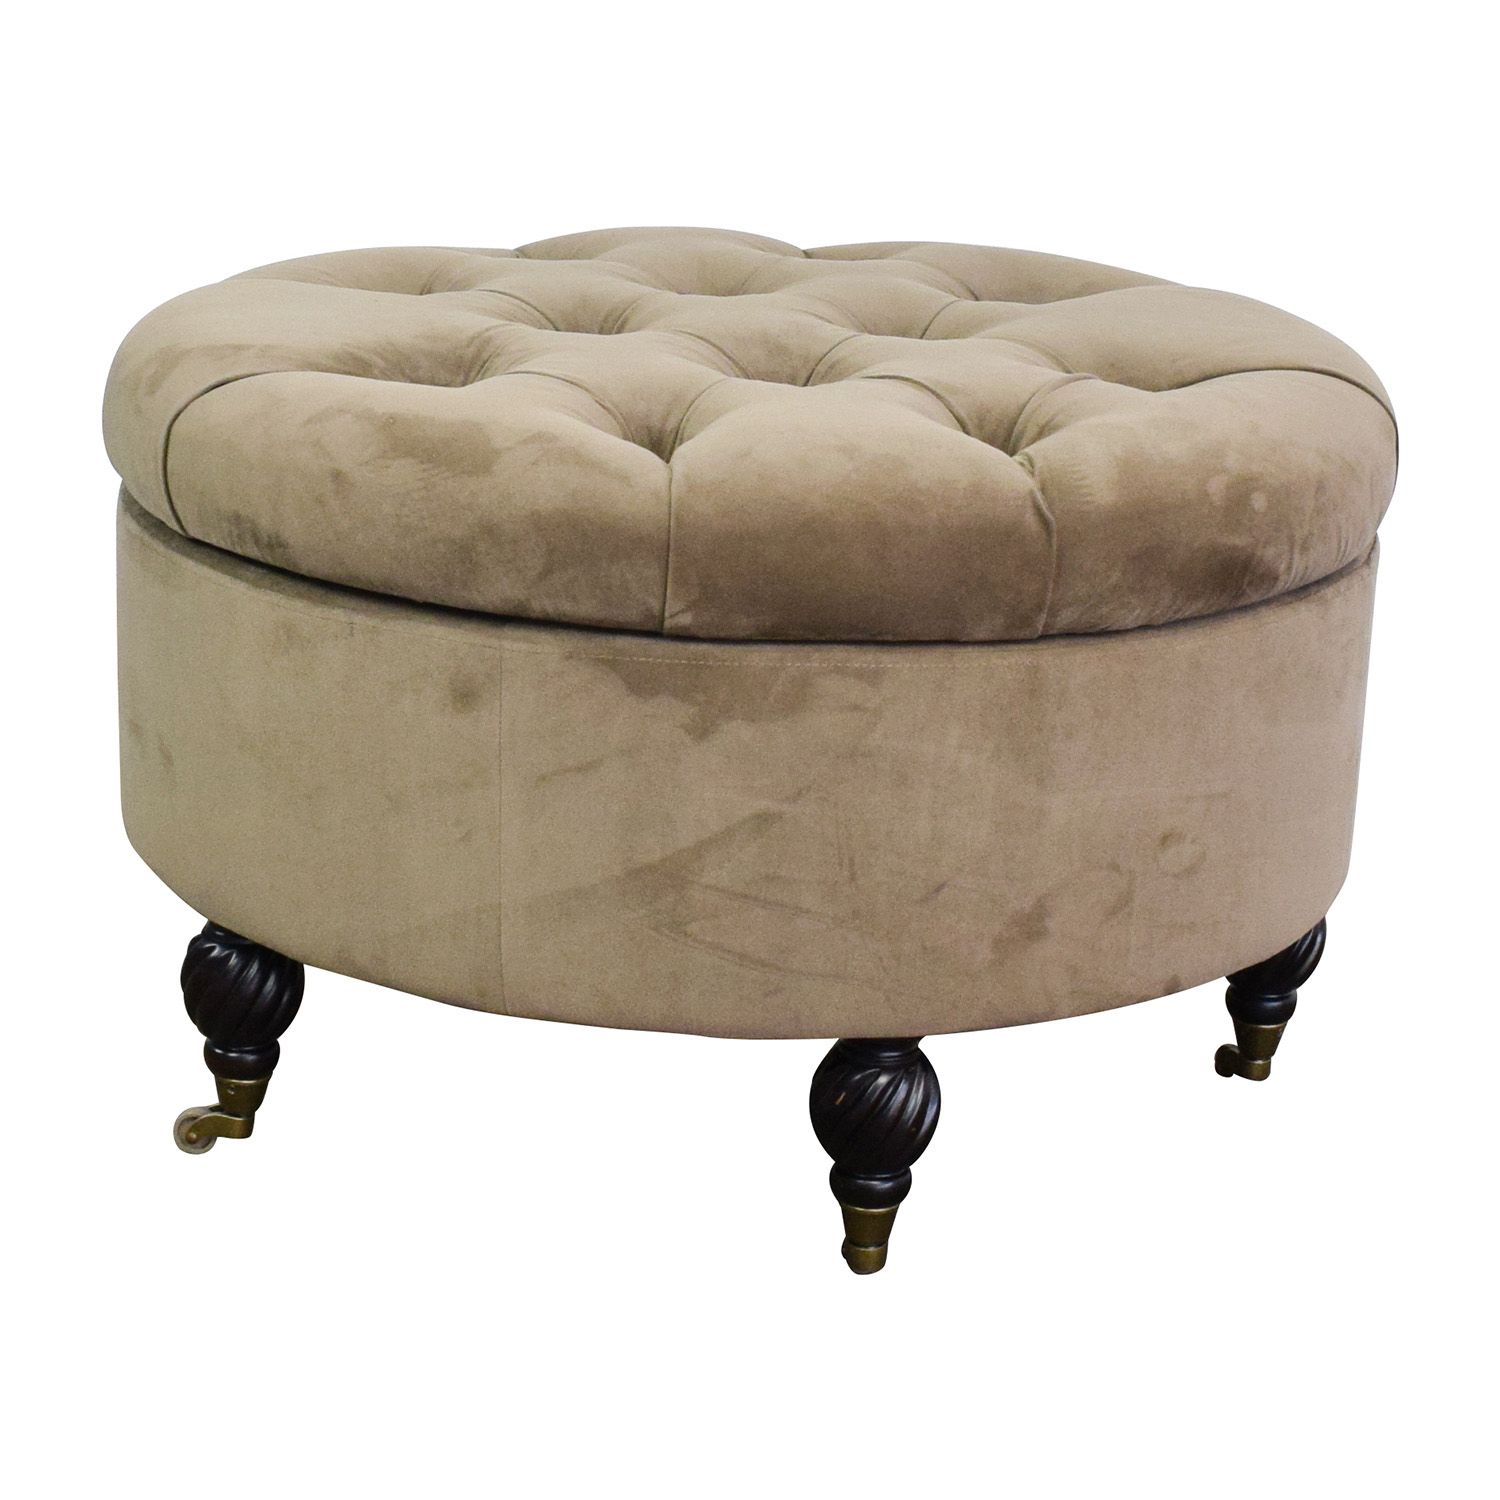 55% Off – Frontgate Frontgate Round Tufted Storage Ottoman / Storage With Regard To Tufted Ottomans (View 10 of 20)